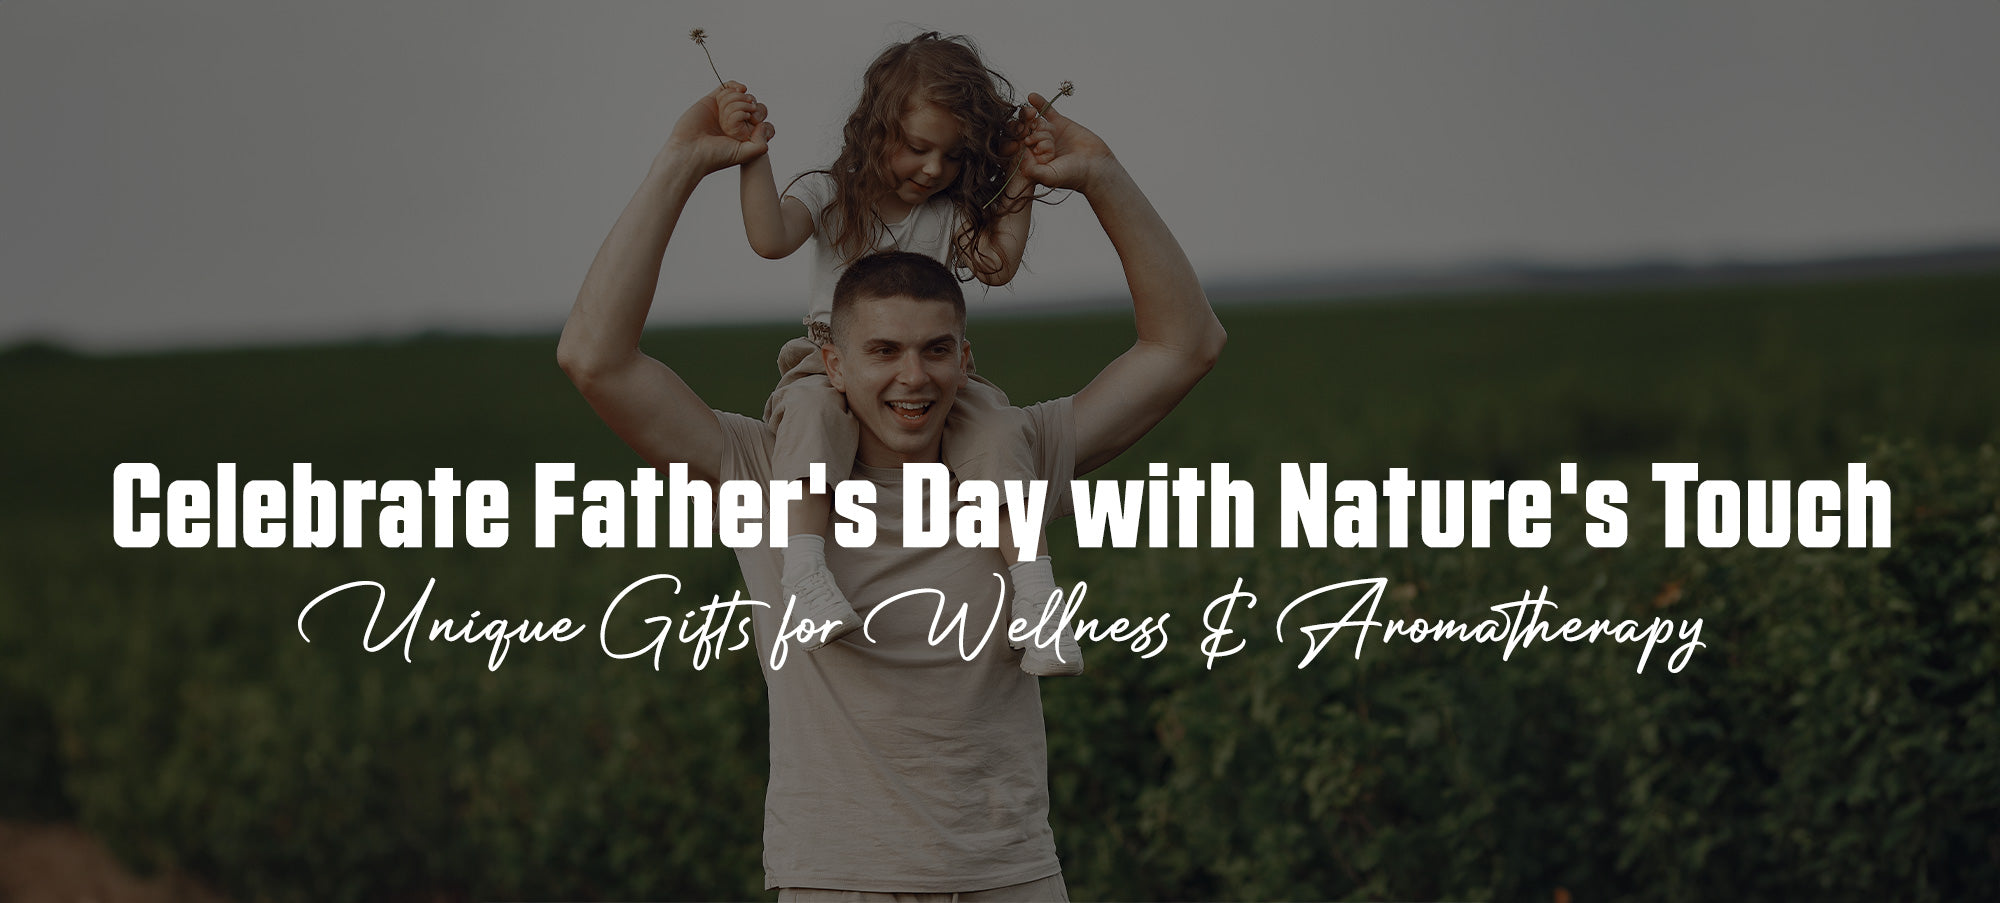 Celebrate Father’s Day With Unique Gifts Sets for Wellness & Aromatherapy